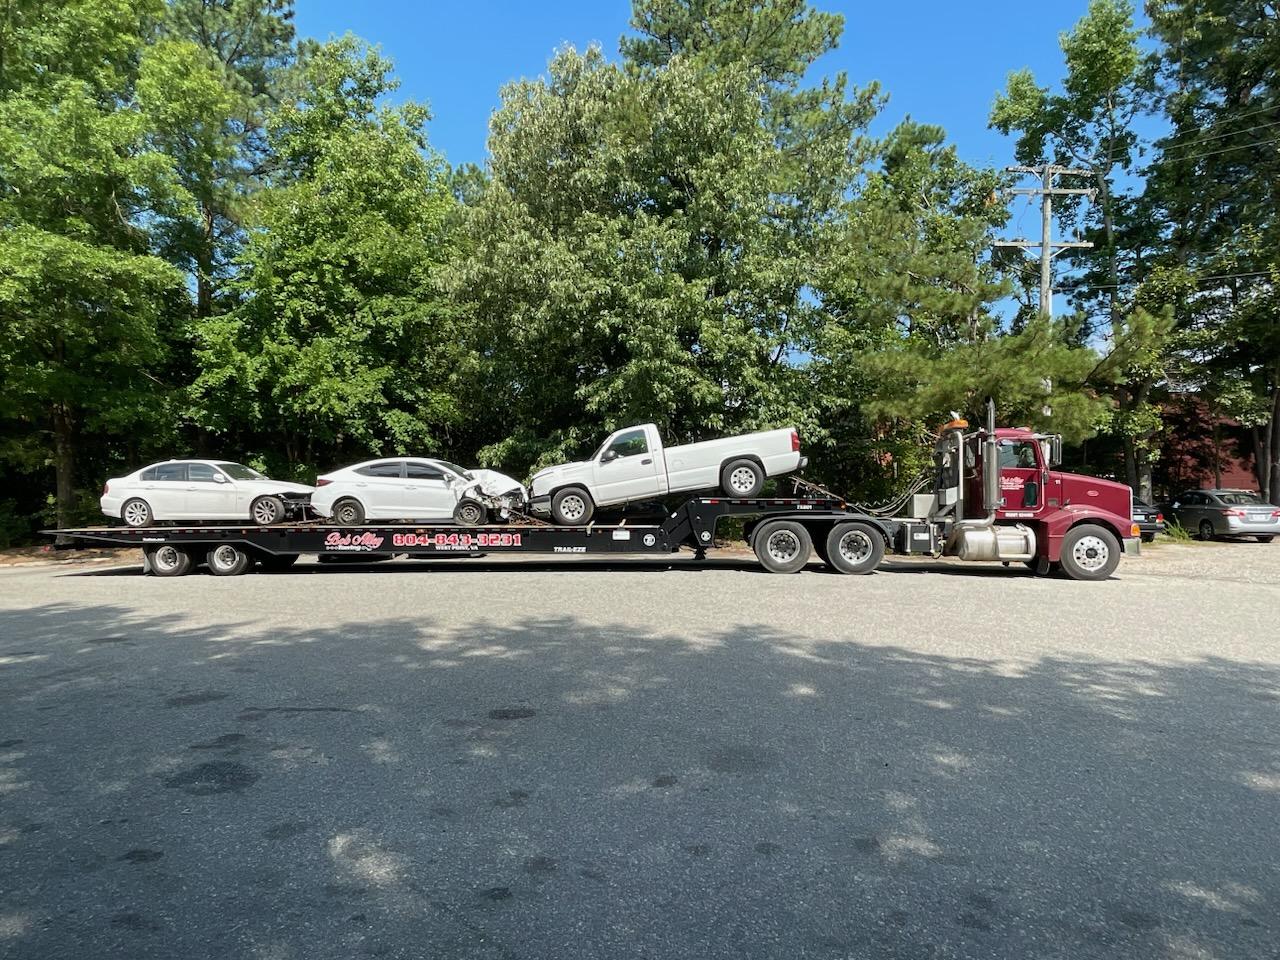 We can handle all your tow requests! Bob Alley Towing West Point (804)843-3231